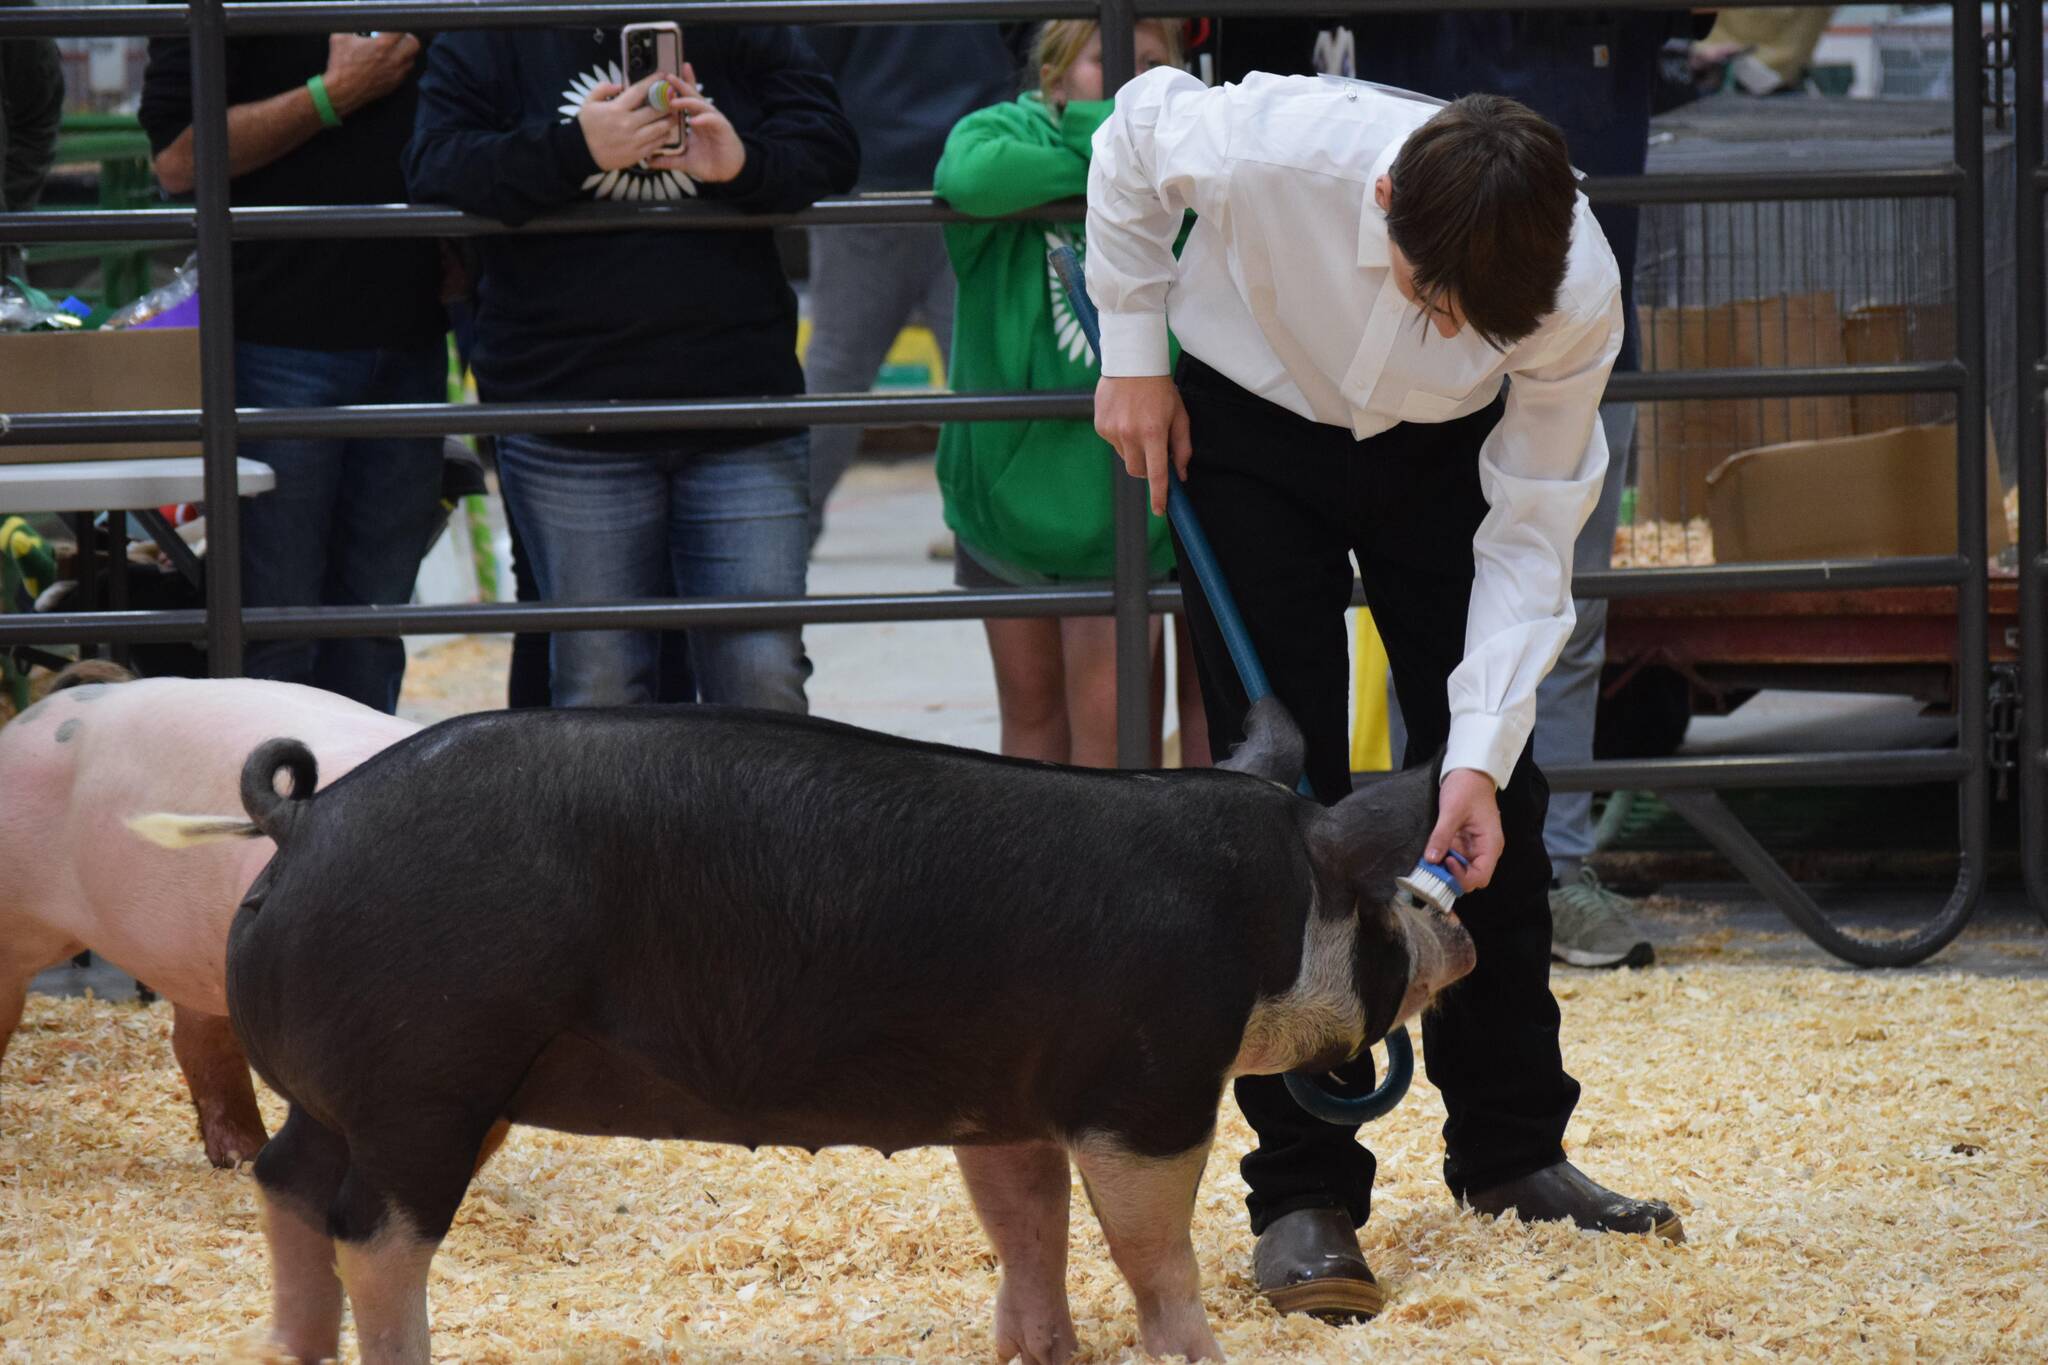 Parker Rose shows his pig during the senior swine showmanship round of the Kenai Peninsula 4-H Agriculture Expo at the Soldotna Regional Sports Complex on Friday, Aug. 6, 2021. He was the reserved grand champion in his class. (Camille Botello/Peninsula Clarion)